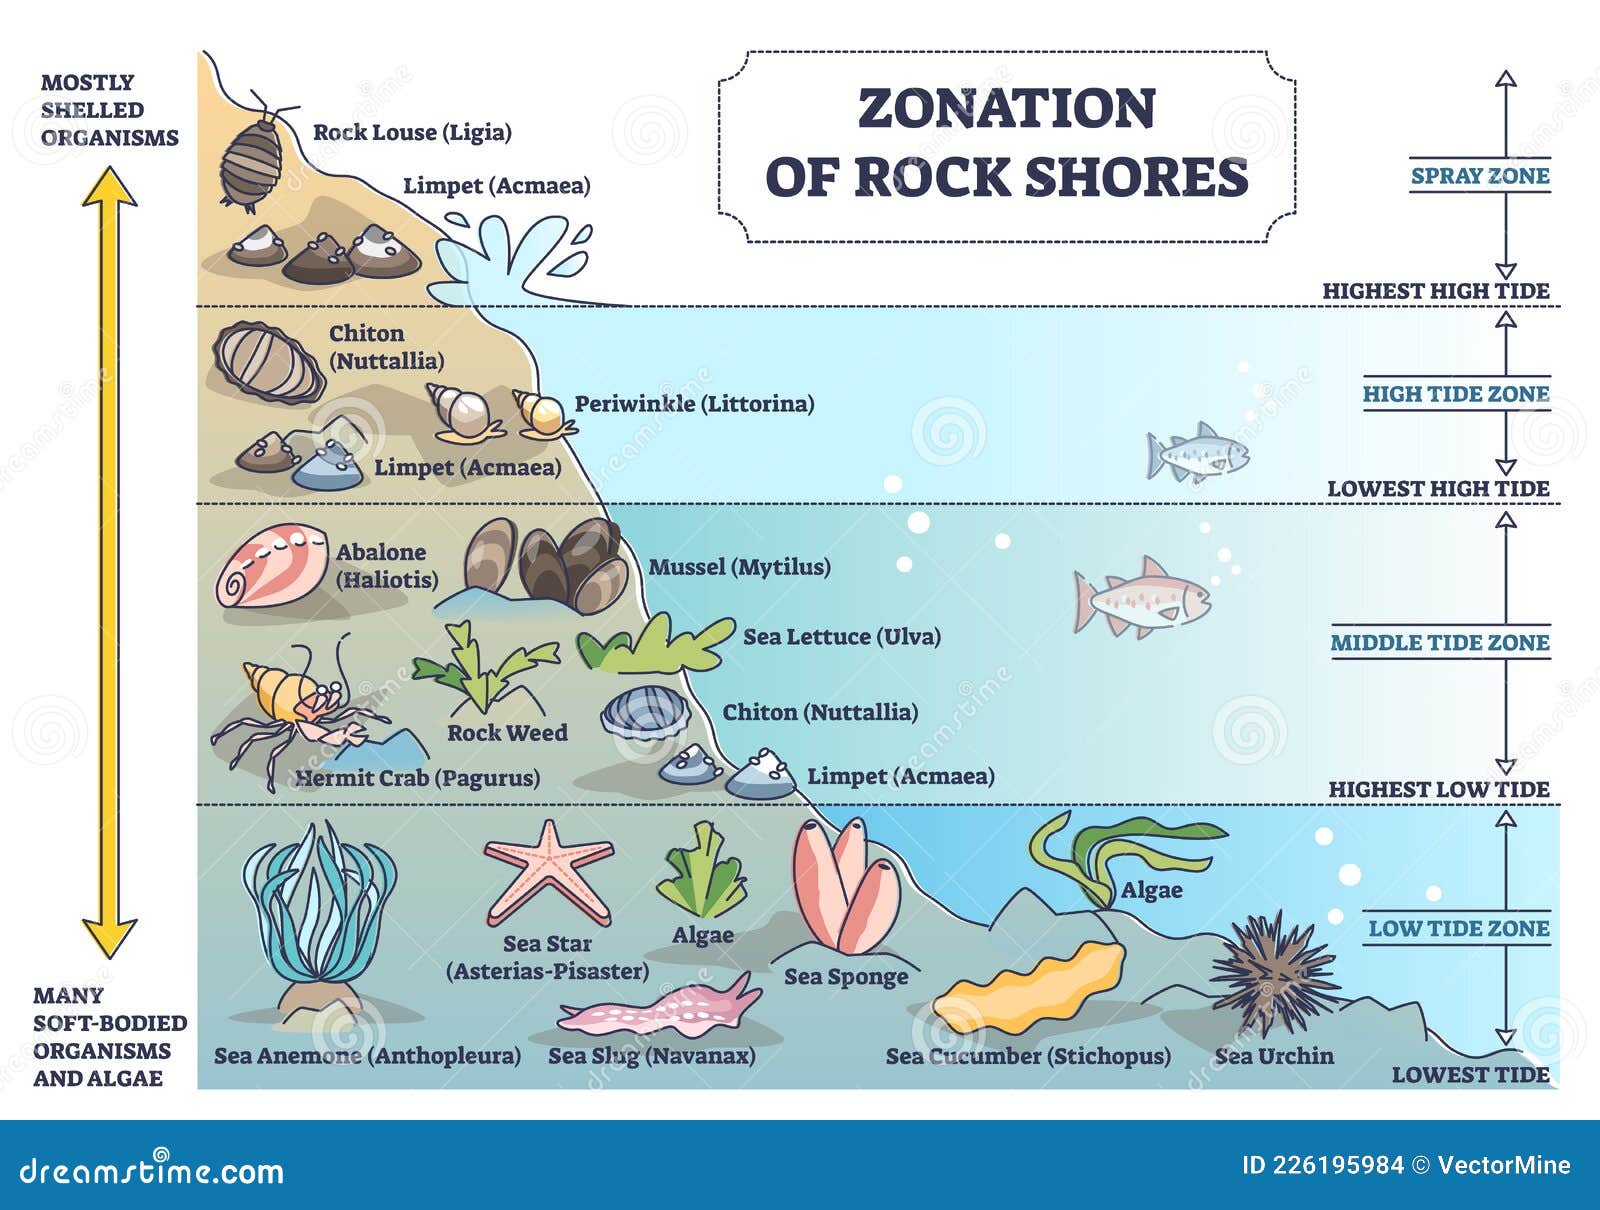 zonation of rock shores with underwater species and organisms outline diagram